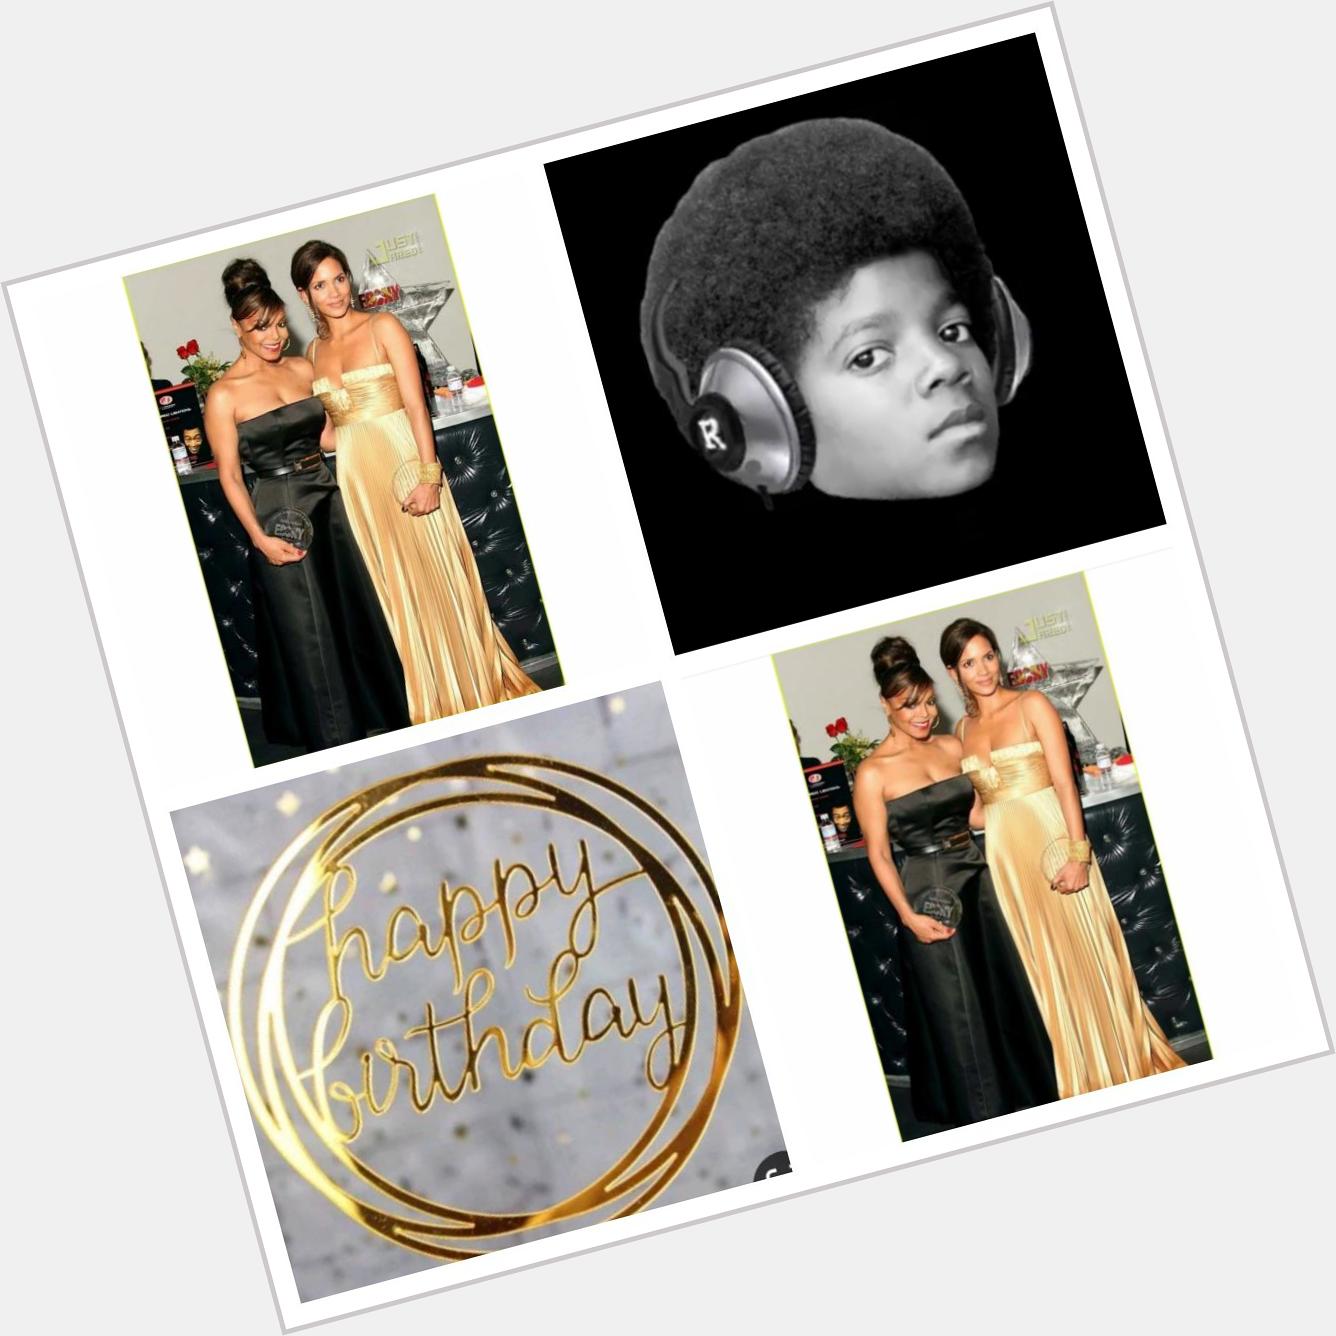 With a Childs heart by Michael Jackson     happy birthday Halle berry... 